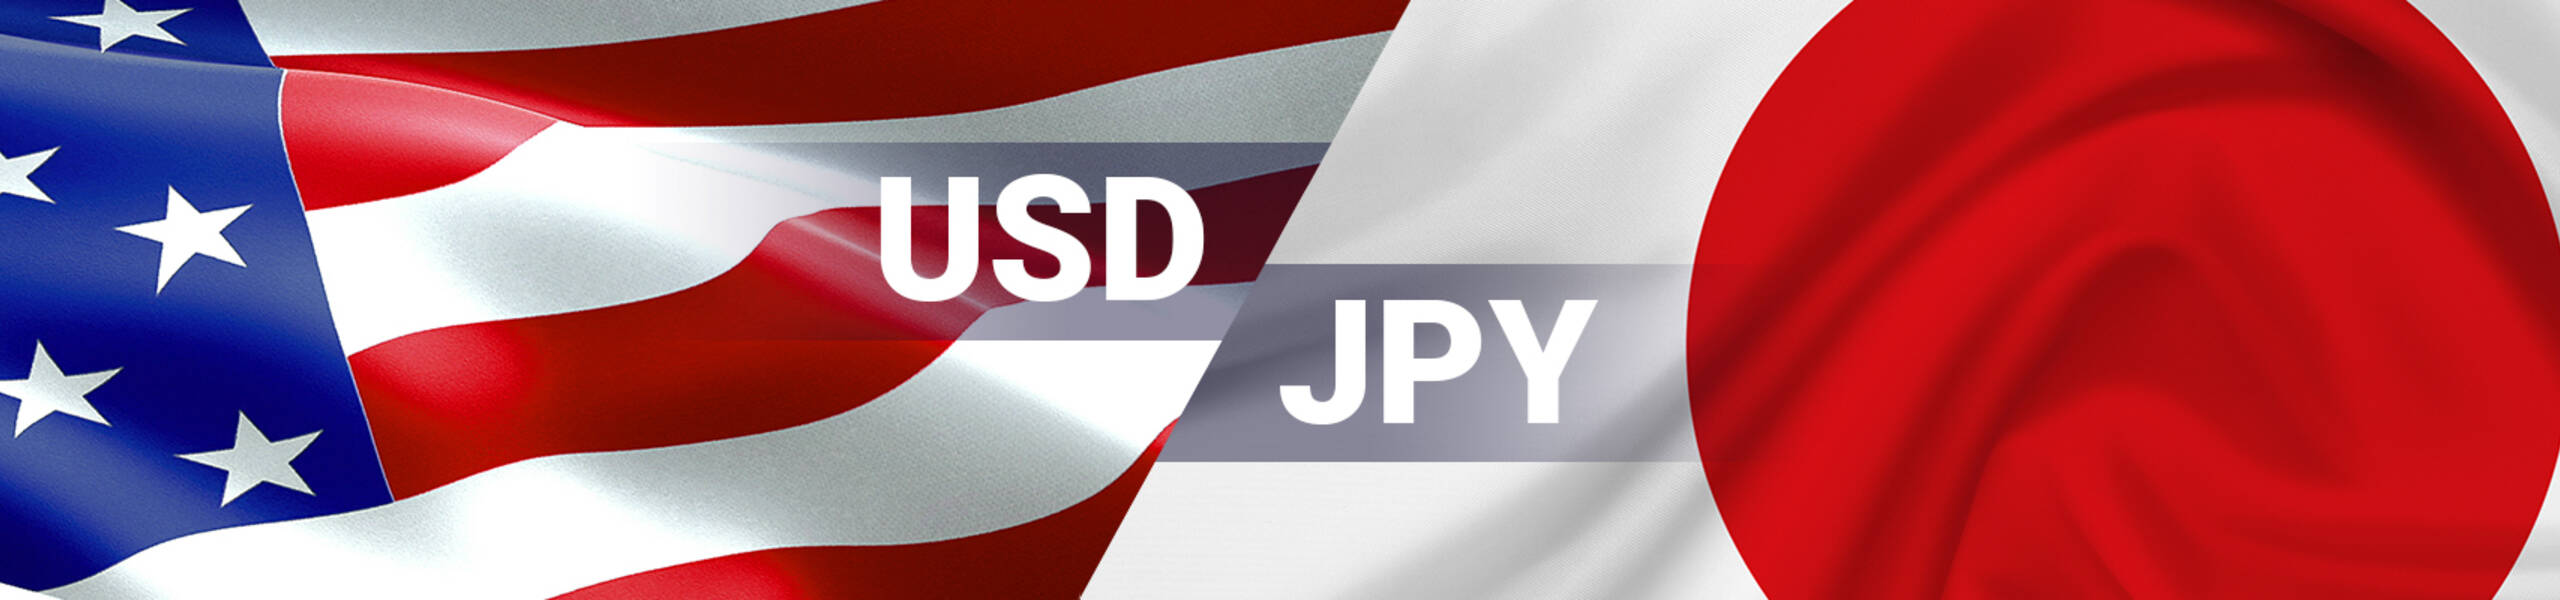 USD/JPY Dailyレポート 2017/05/04